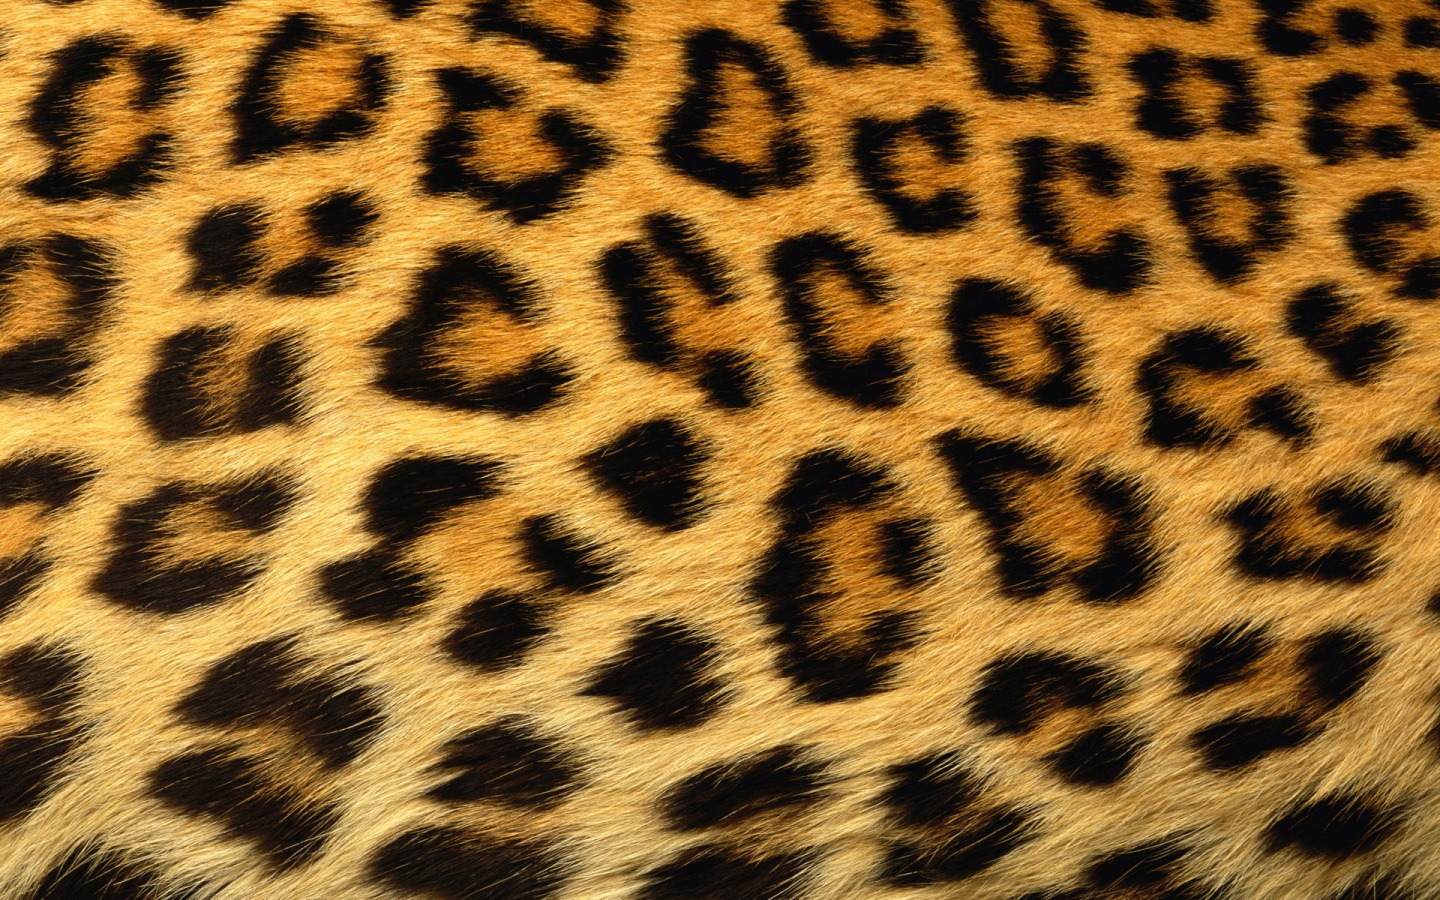 Leopard Print Background X Image At Clker Vector Clip